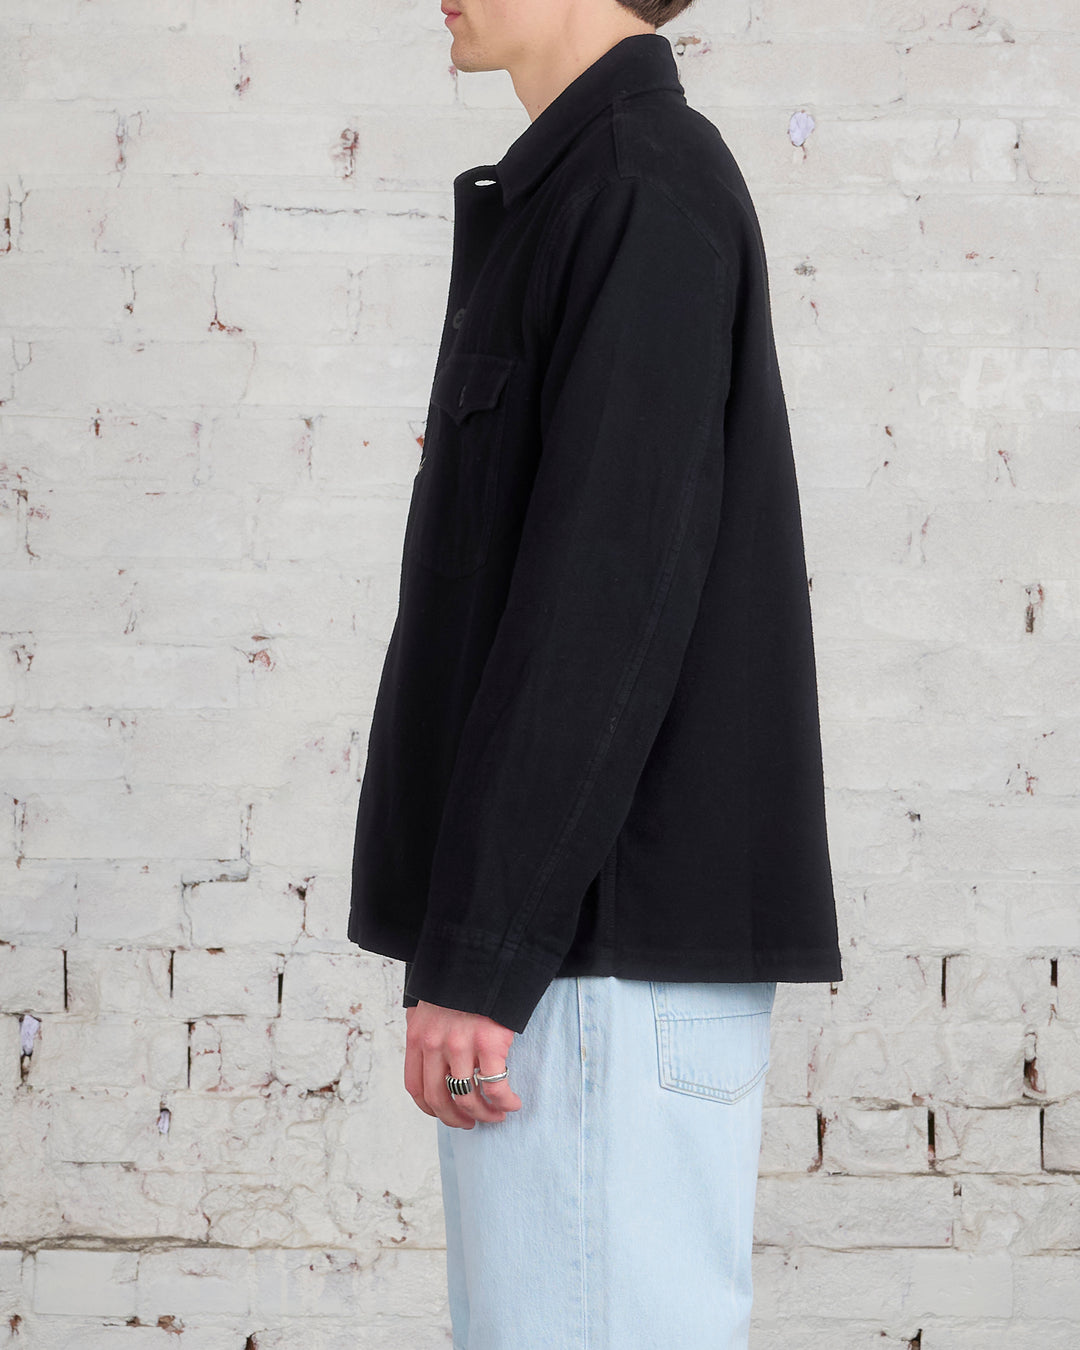 Our Legacy Evening Coach Jacket Black Brushed Cotton